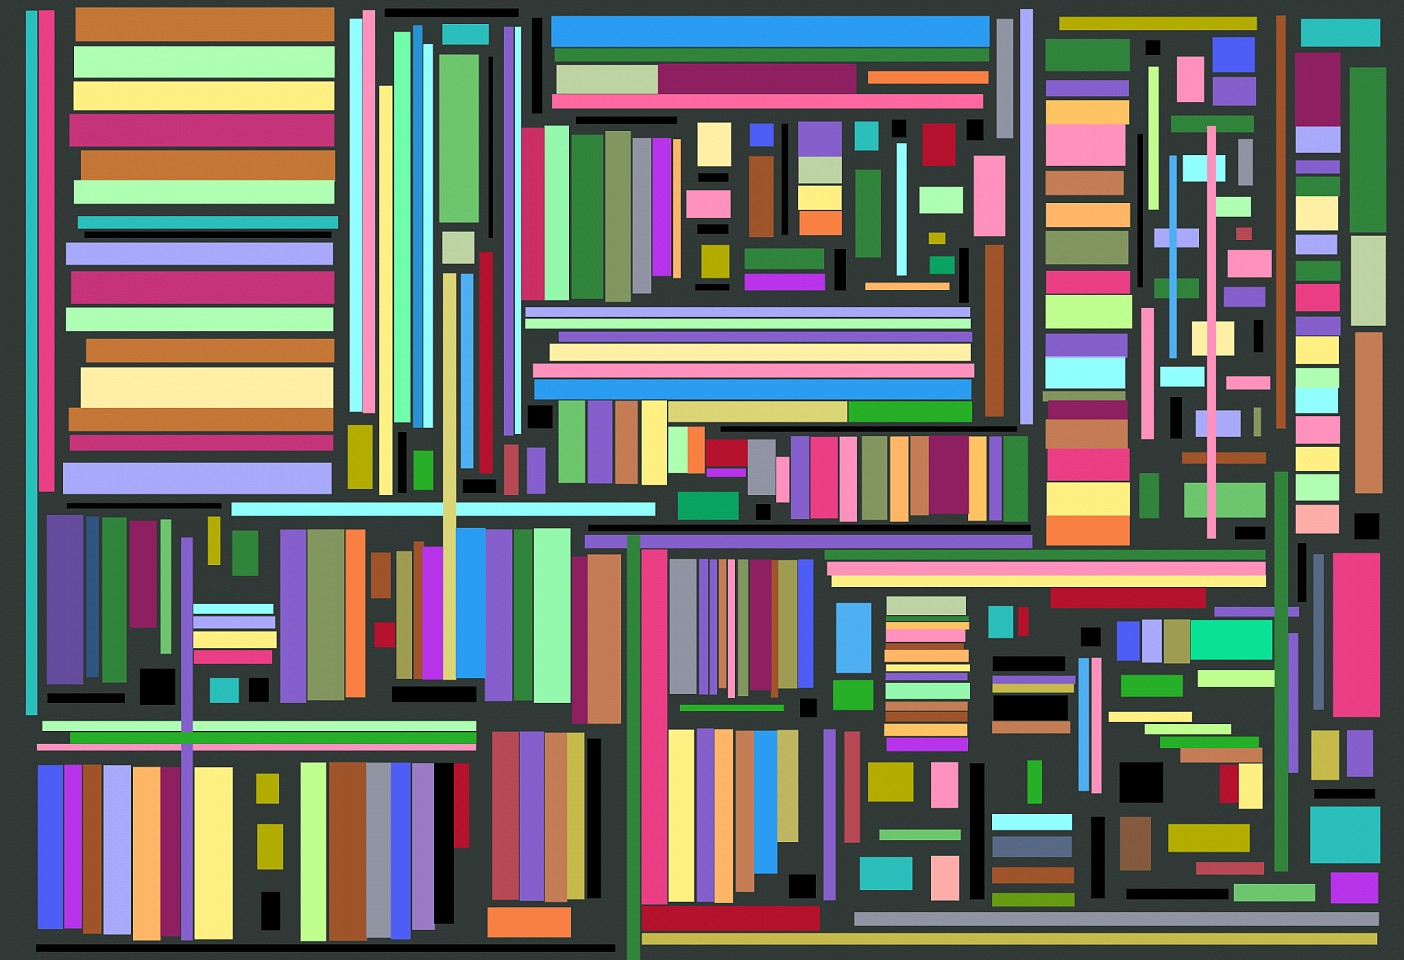 Dane Albert, Color Bars #7, 2023
Acrylic on canvas (Concept), 48 x 72 in. (121.9 x 182.9 cm)
Series of colored lines and shapes in multiple configurations
DA.2023.bars-007